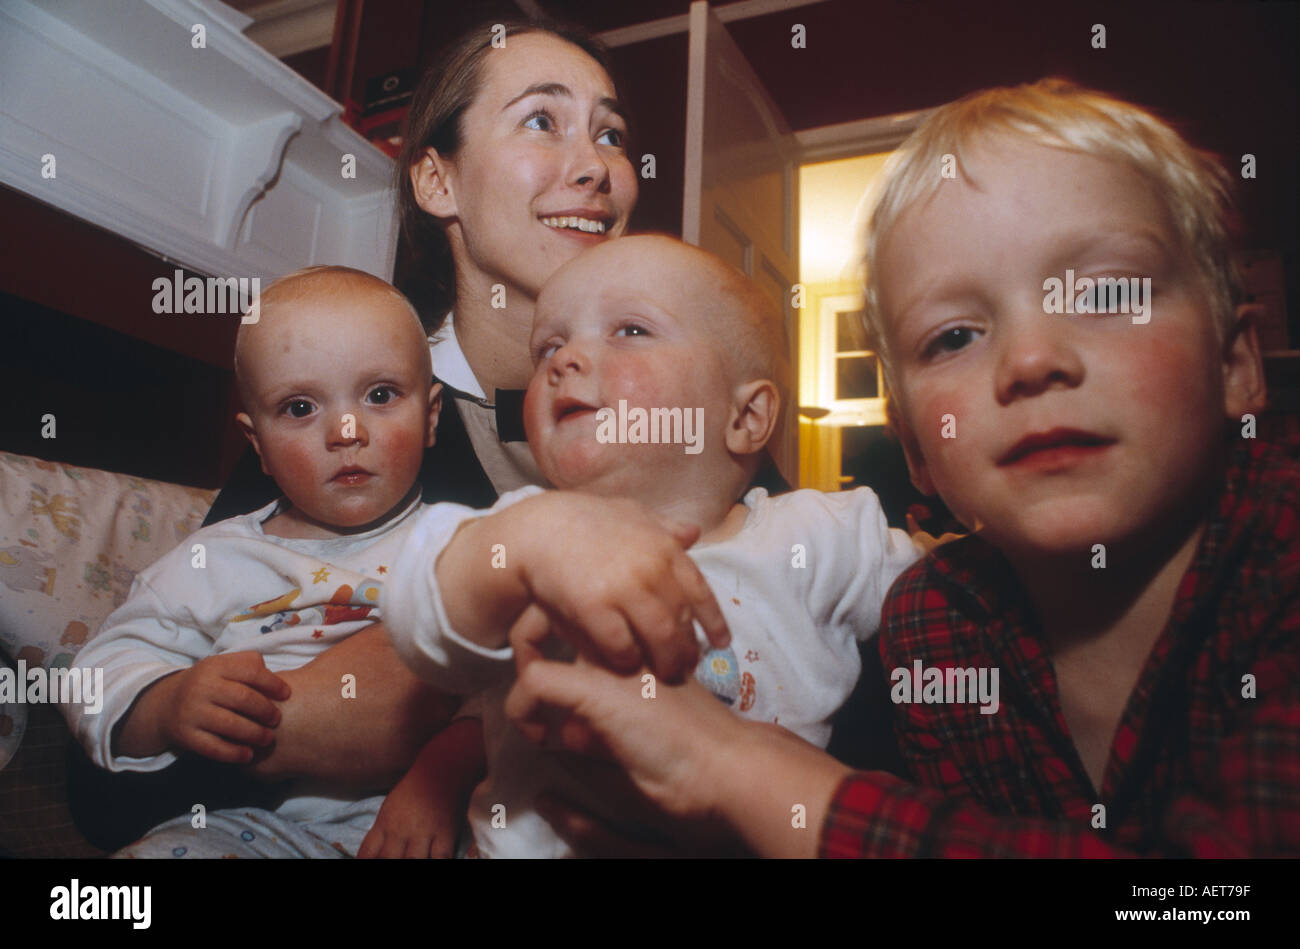 Trained  norland nanny at work in london homes giving  professional child care Stock Photo